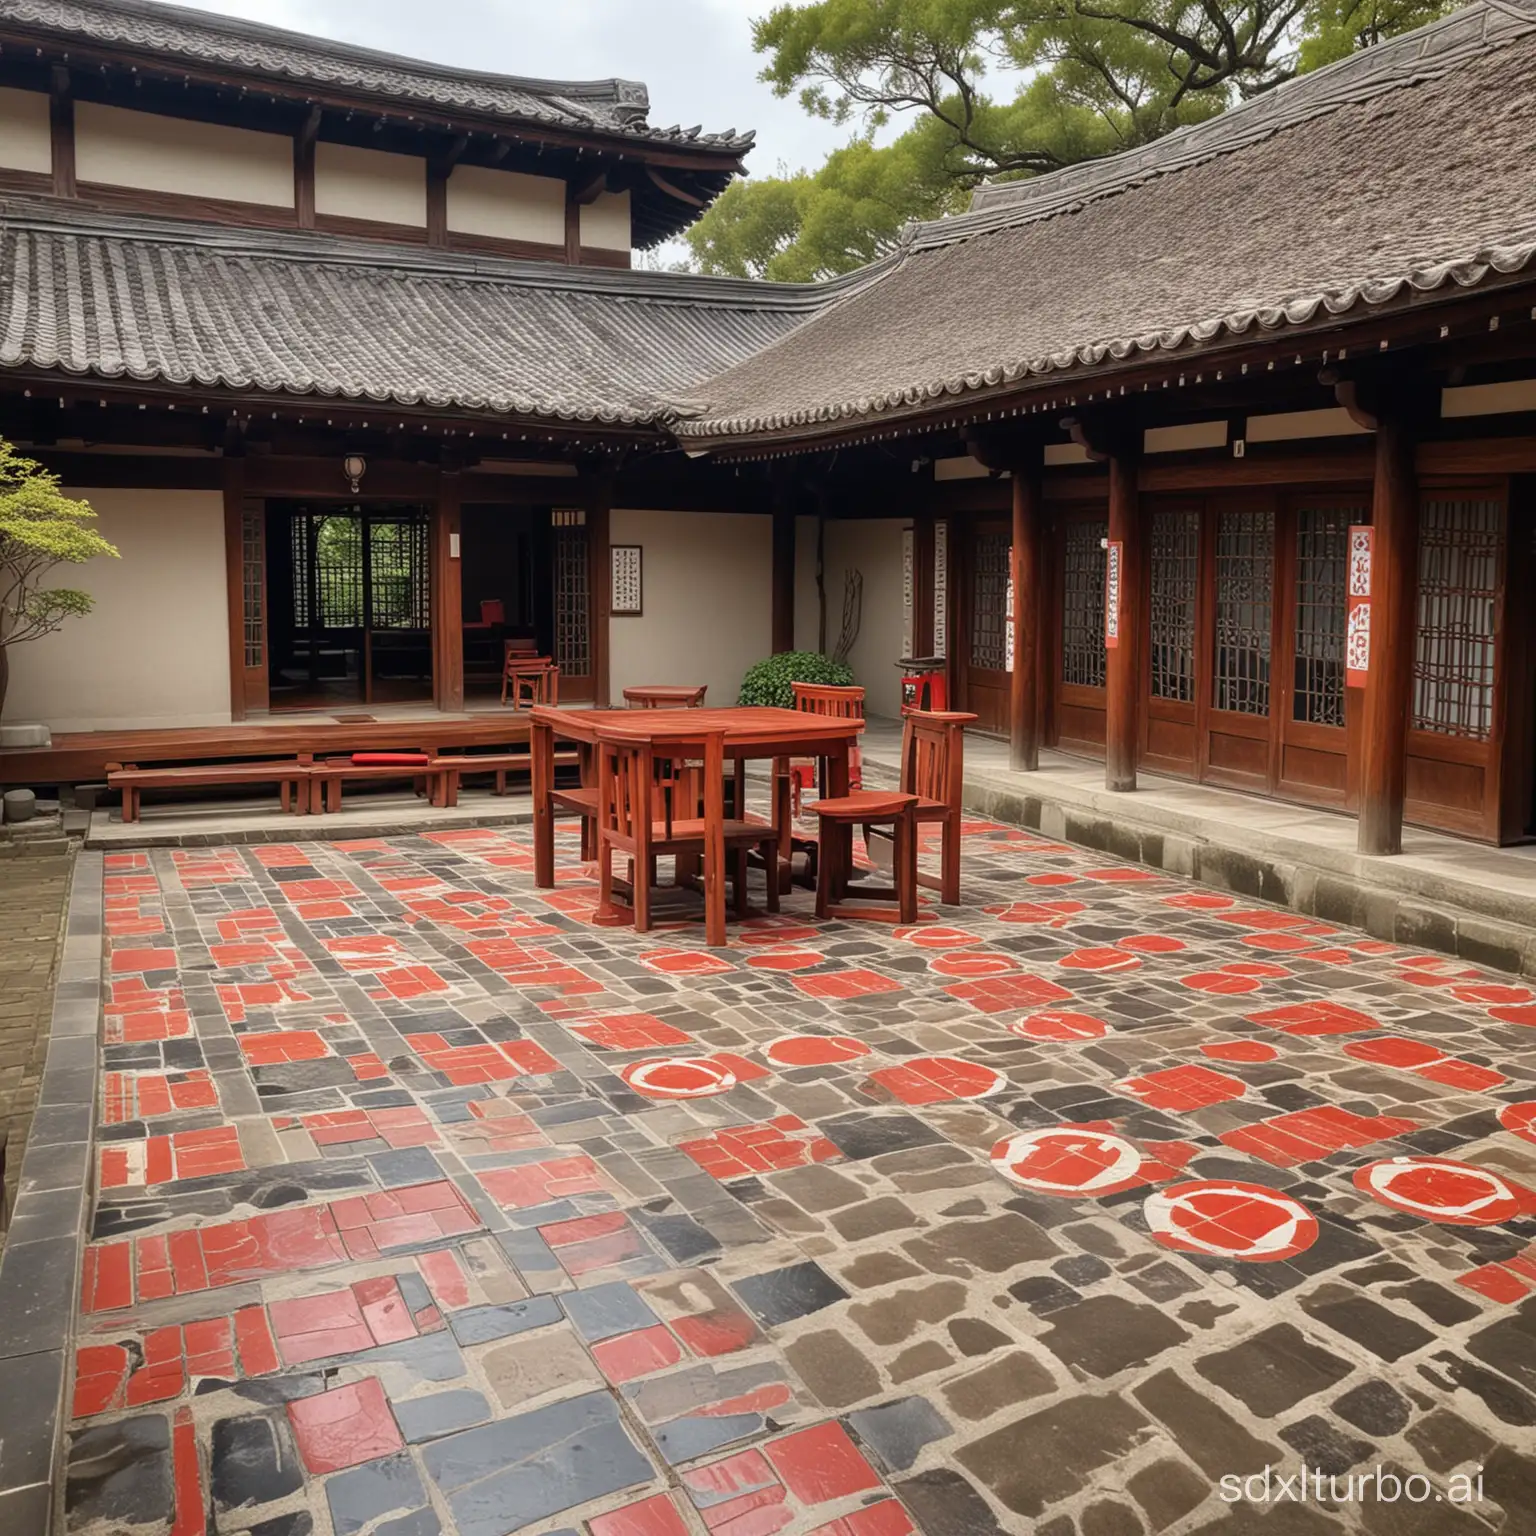 a ancient japanese temple,with retro tiles,with bars,lively,there are five big red round tables,outdoor wooden floor


